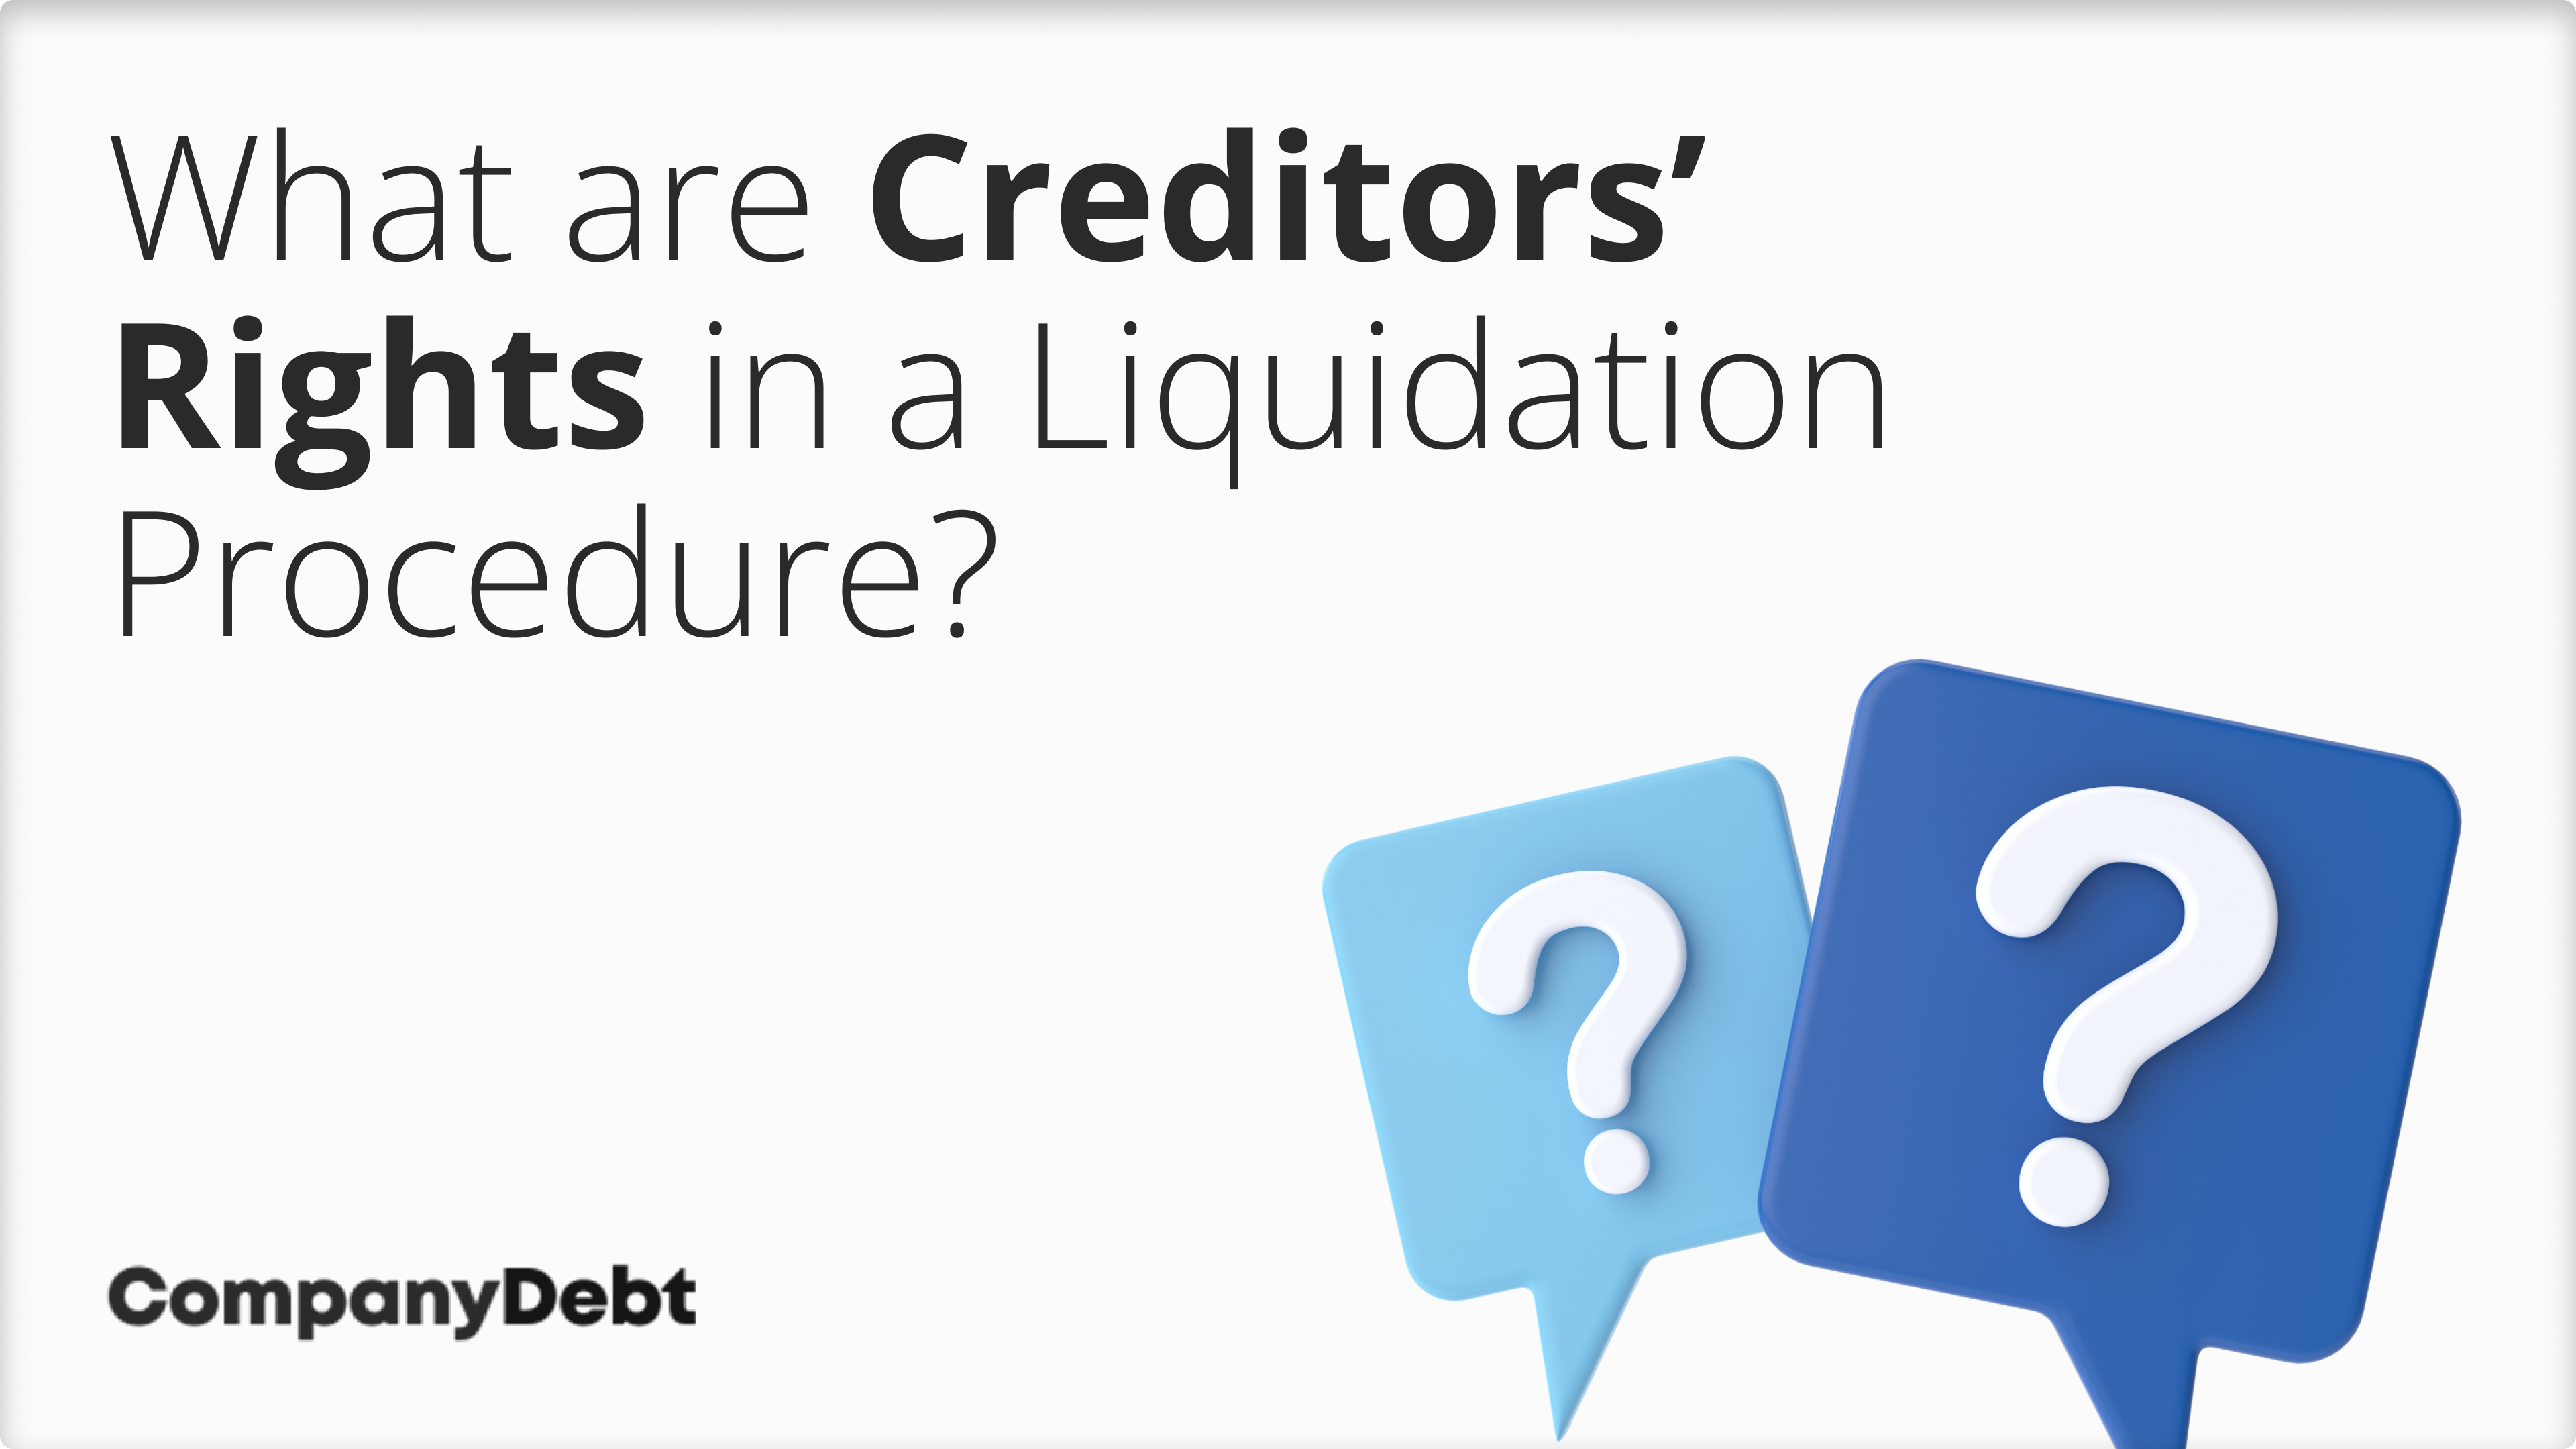 What are Creditors’ Rights in a Liquidation Procedure?